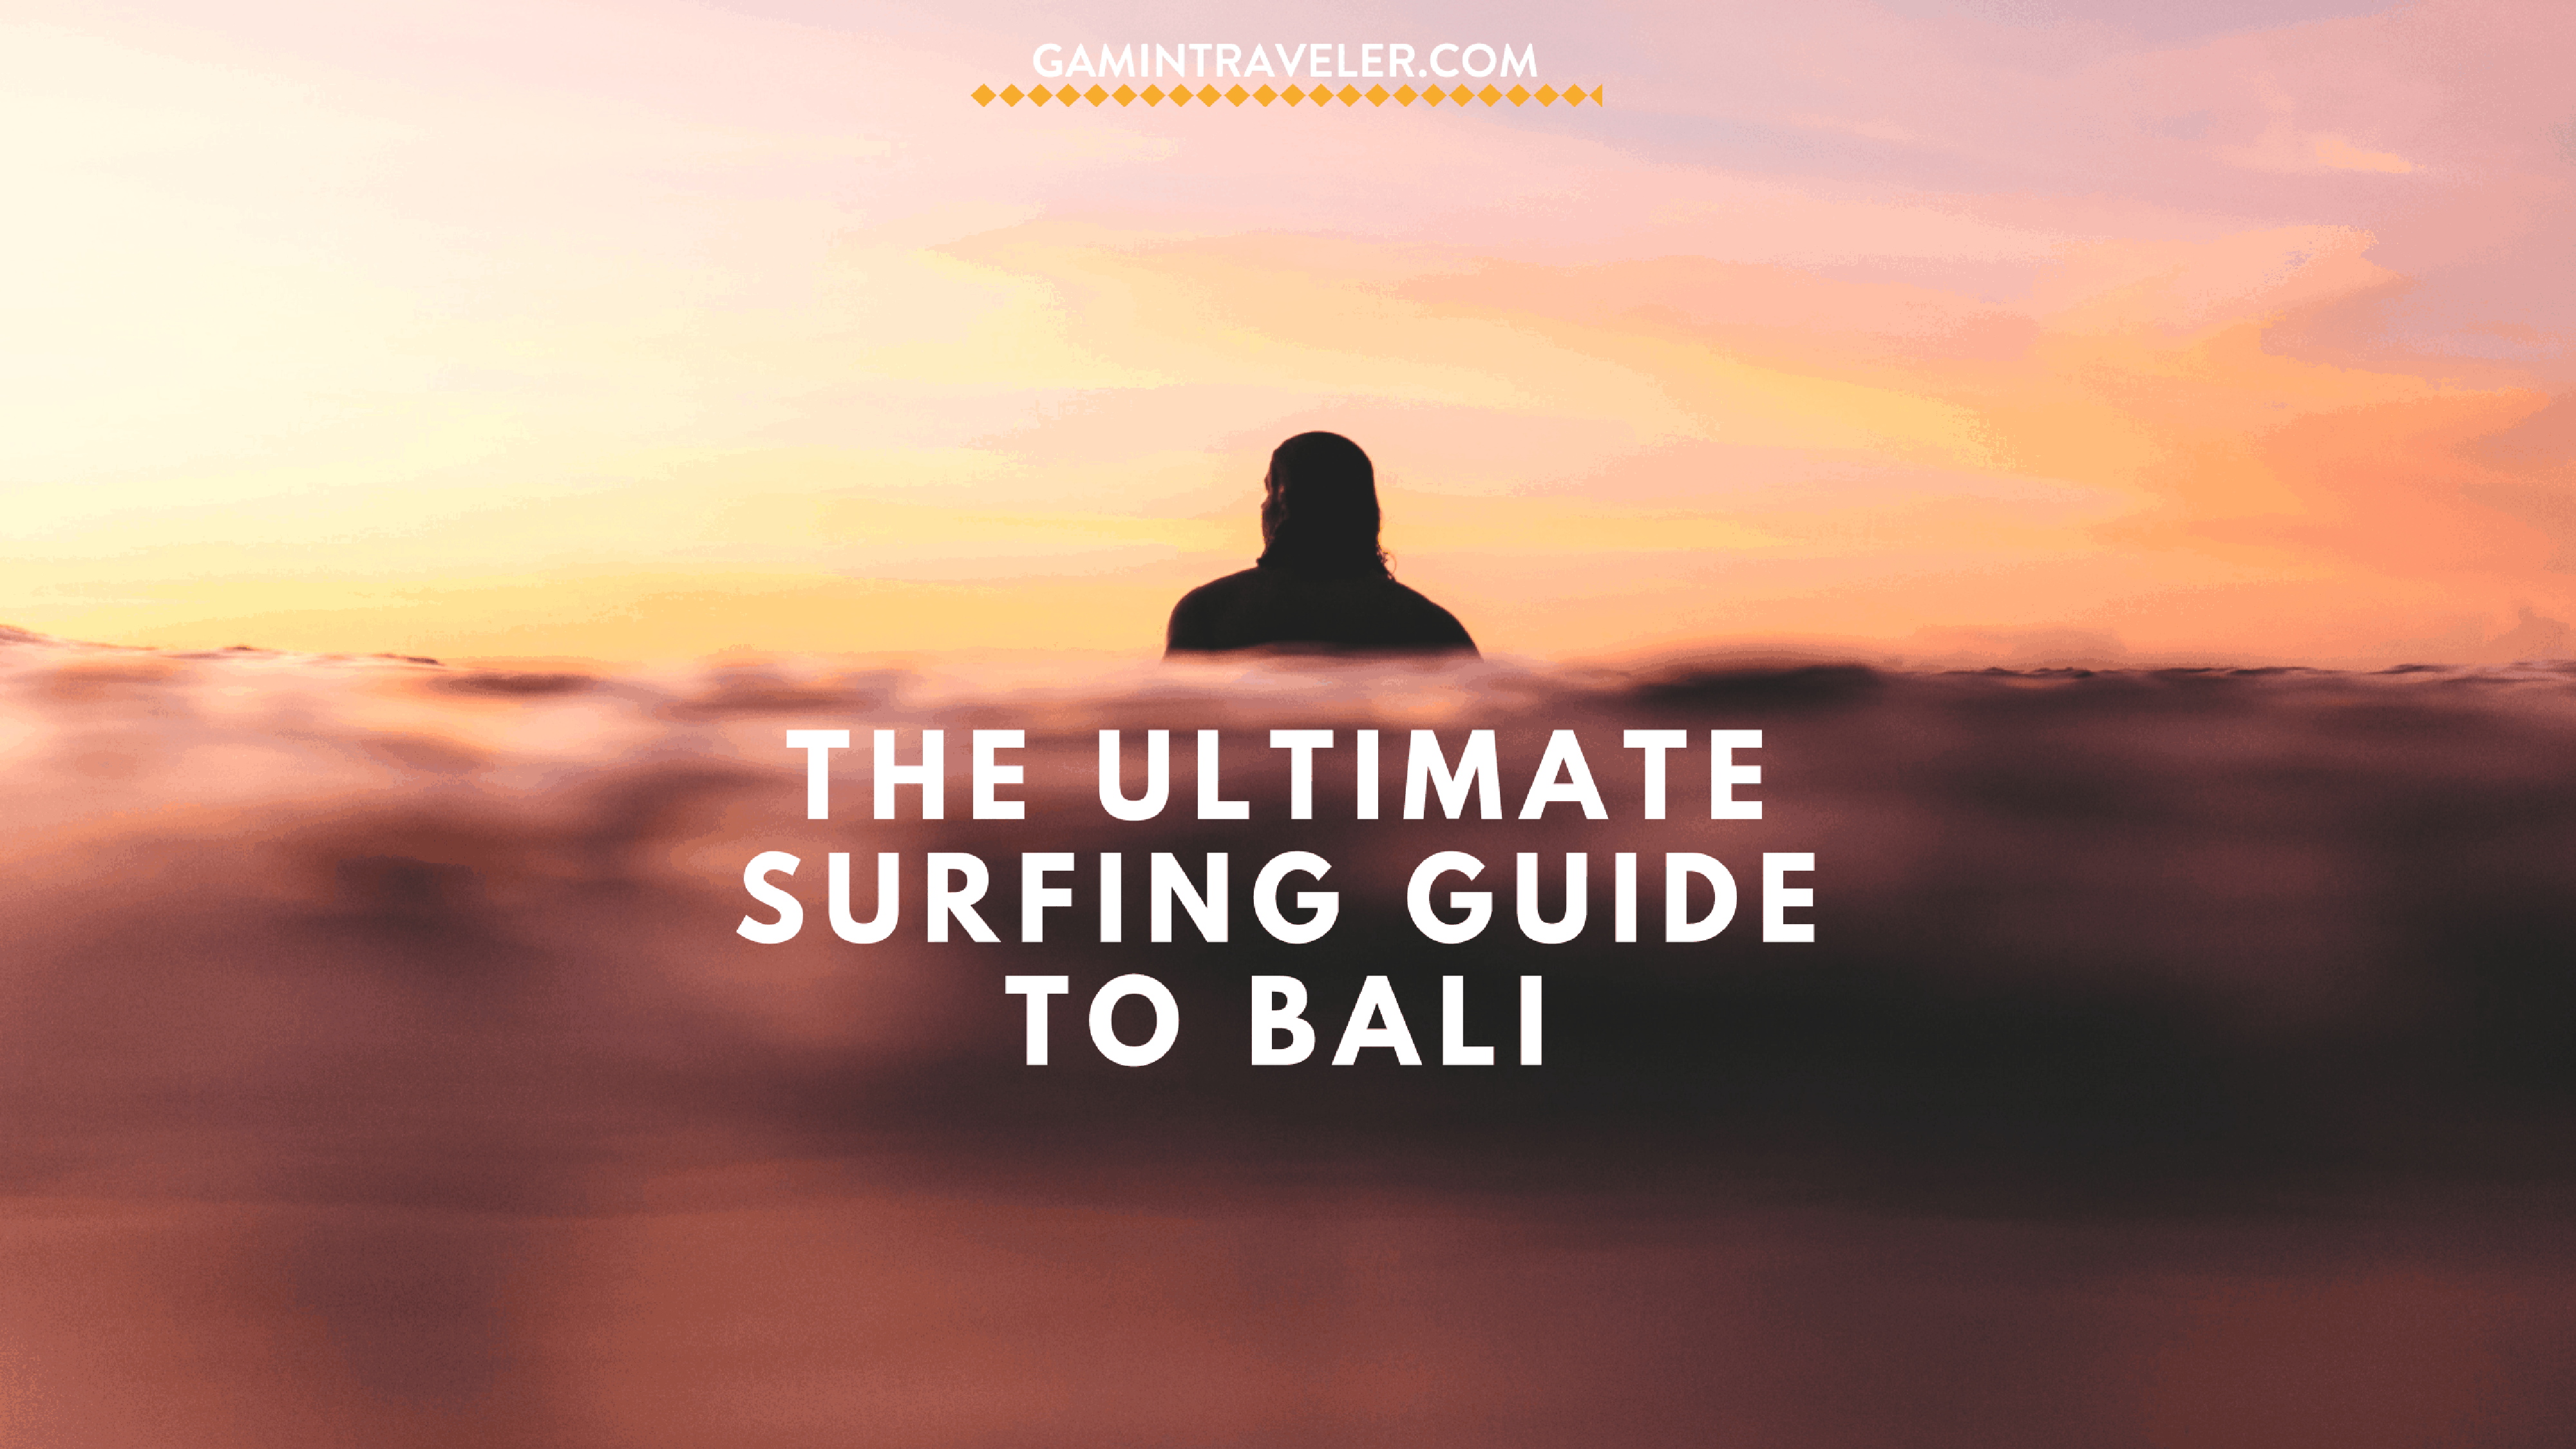 Surfing in Bali is popular worldwide. Know the best beaches to for surfing in Bali depending on your surfing level.